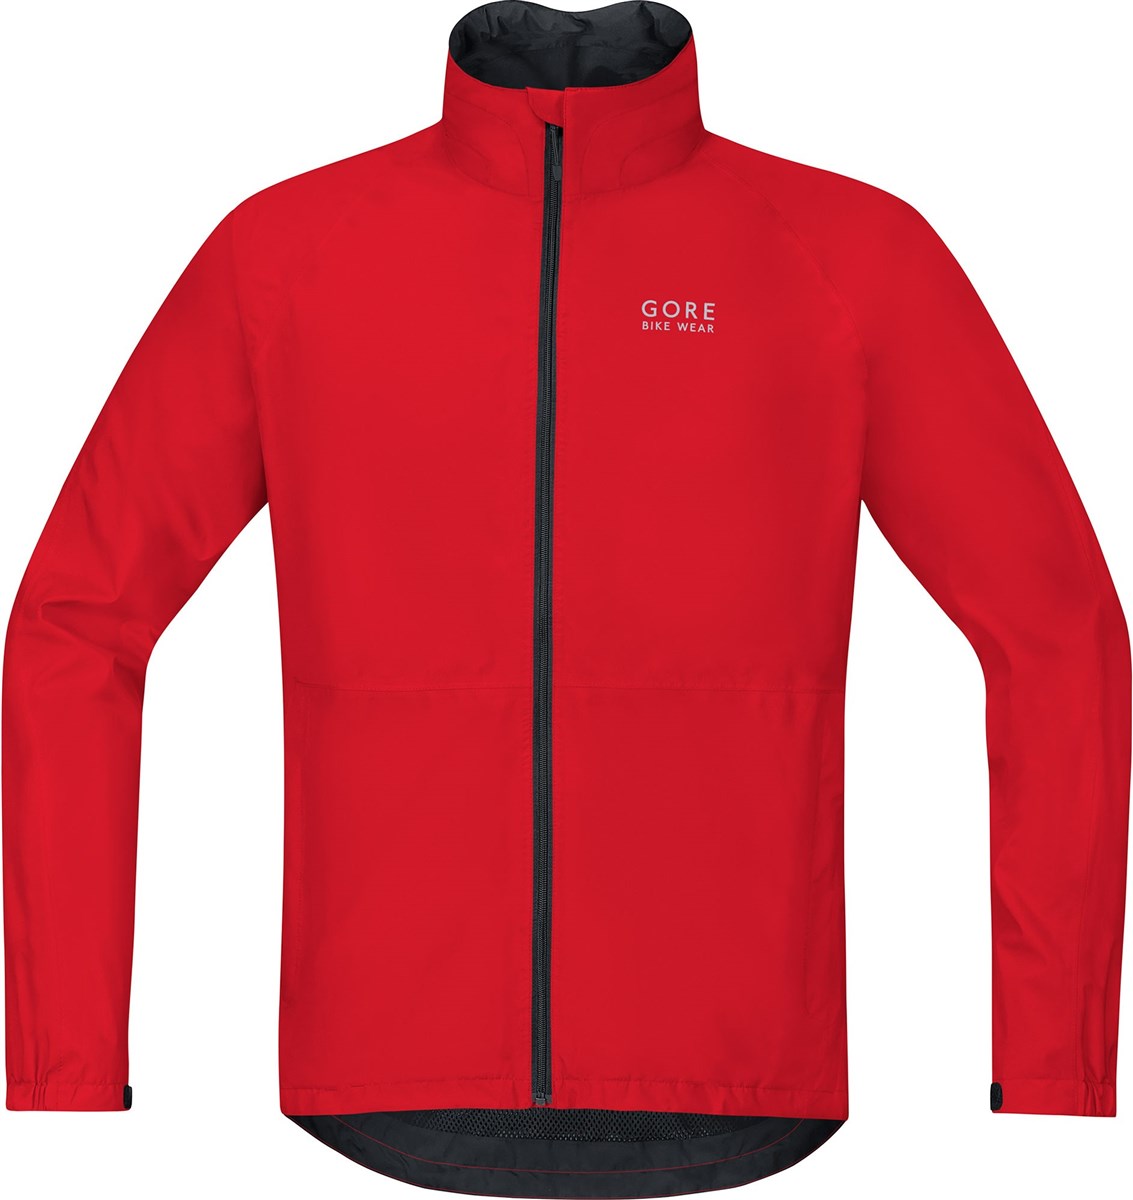 Gore E Gore-Tex Jacket AW17 product image